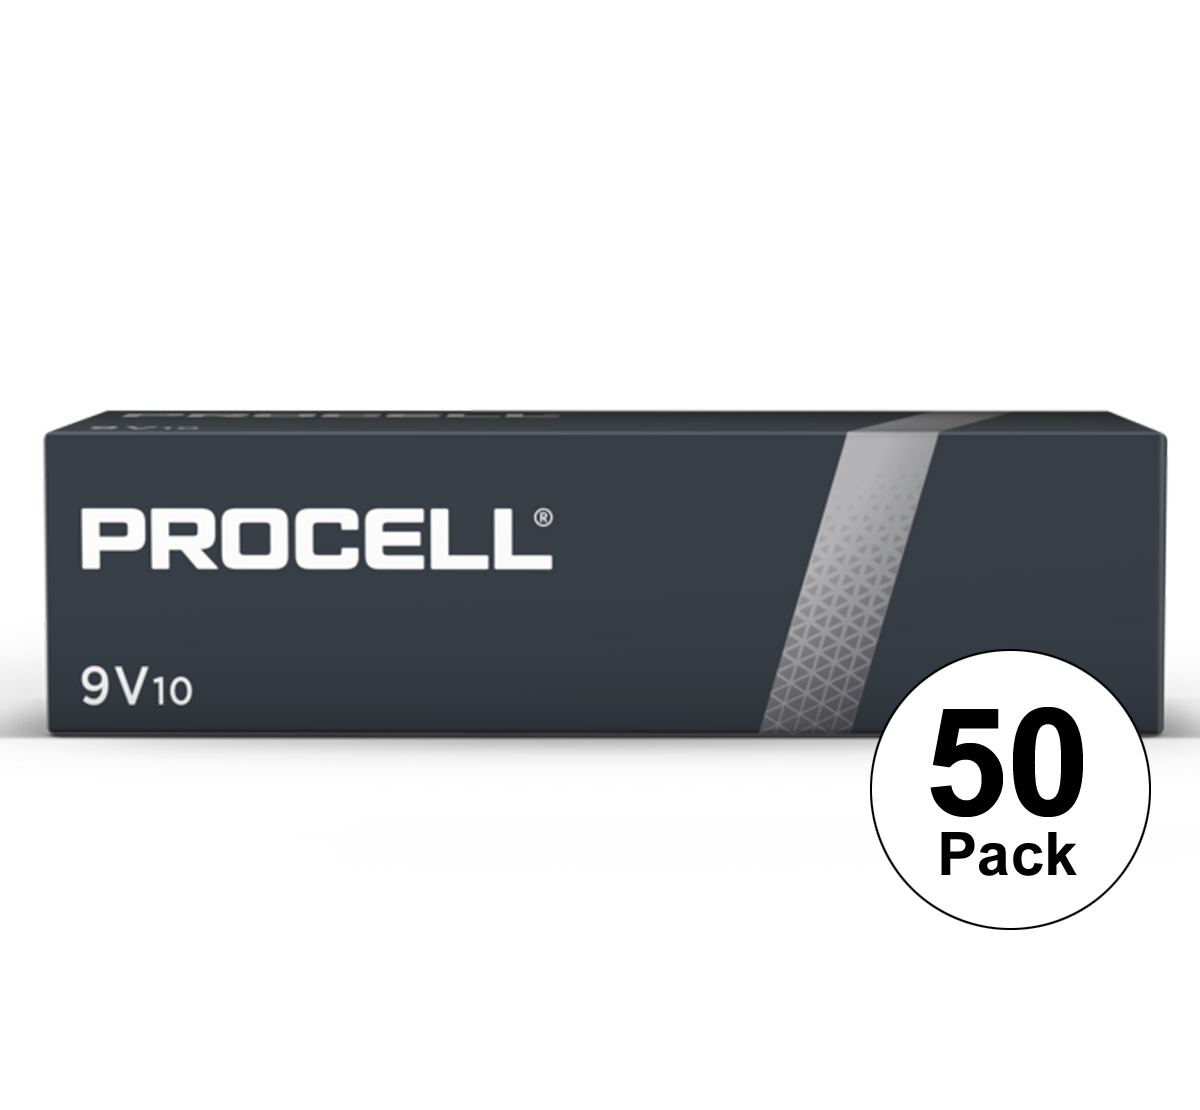 Duracell Procell 9V Batteries - Box of 50